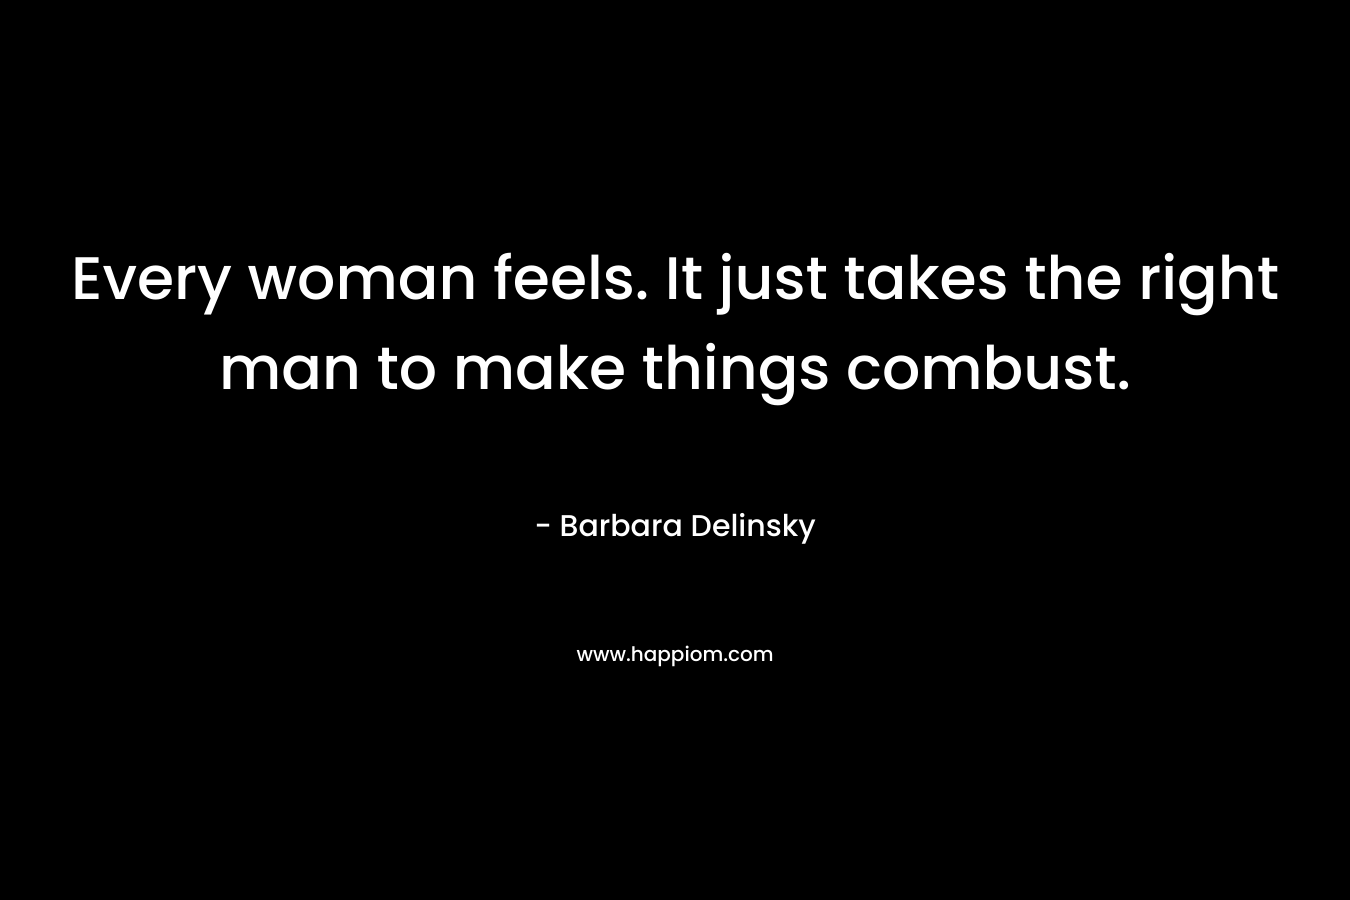 Every woman feels. It just takes the right man to make things combust. – Barbara Delinsky